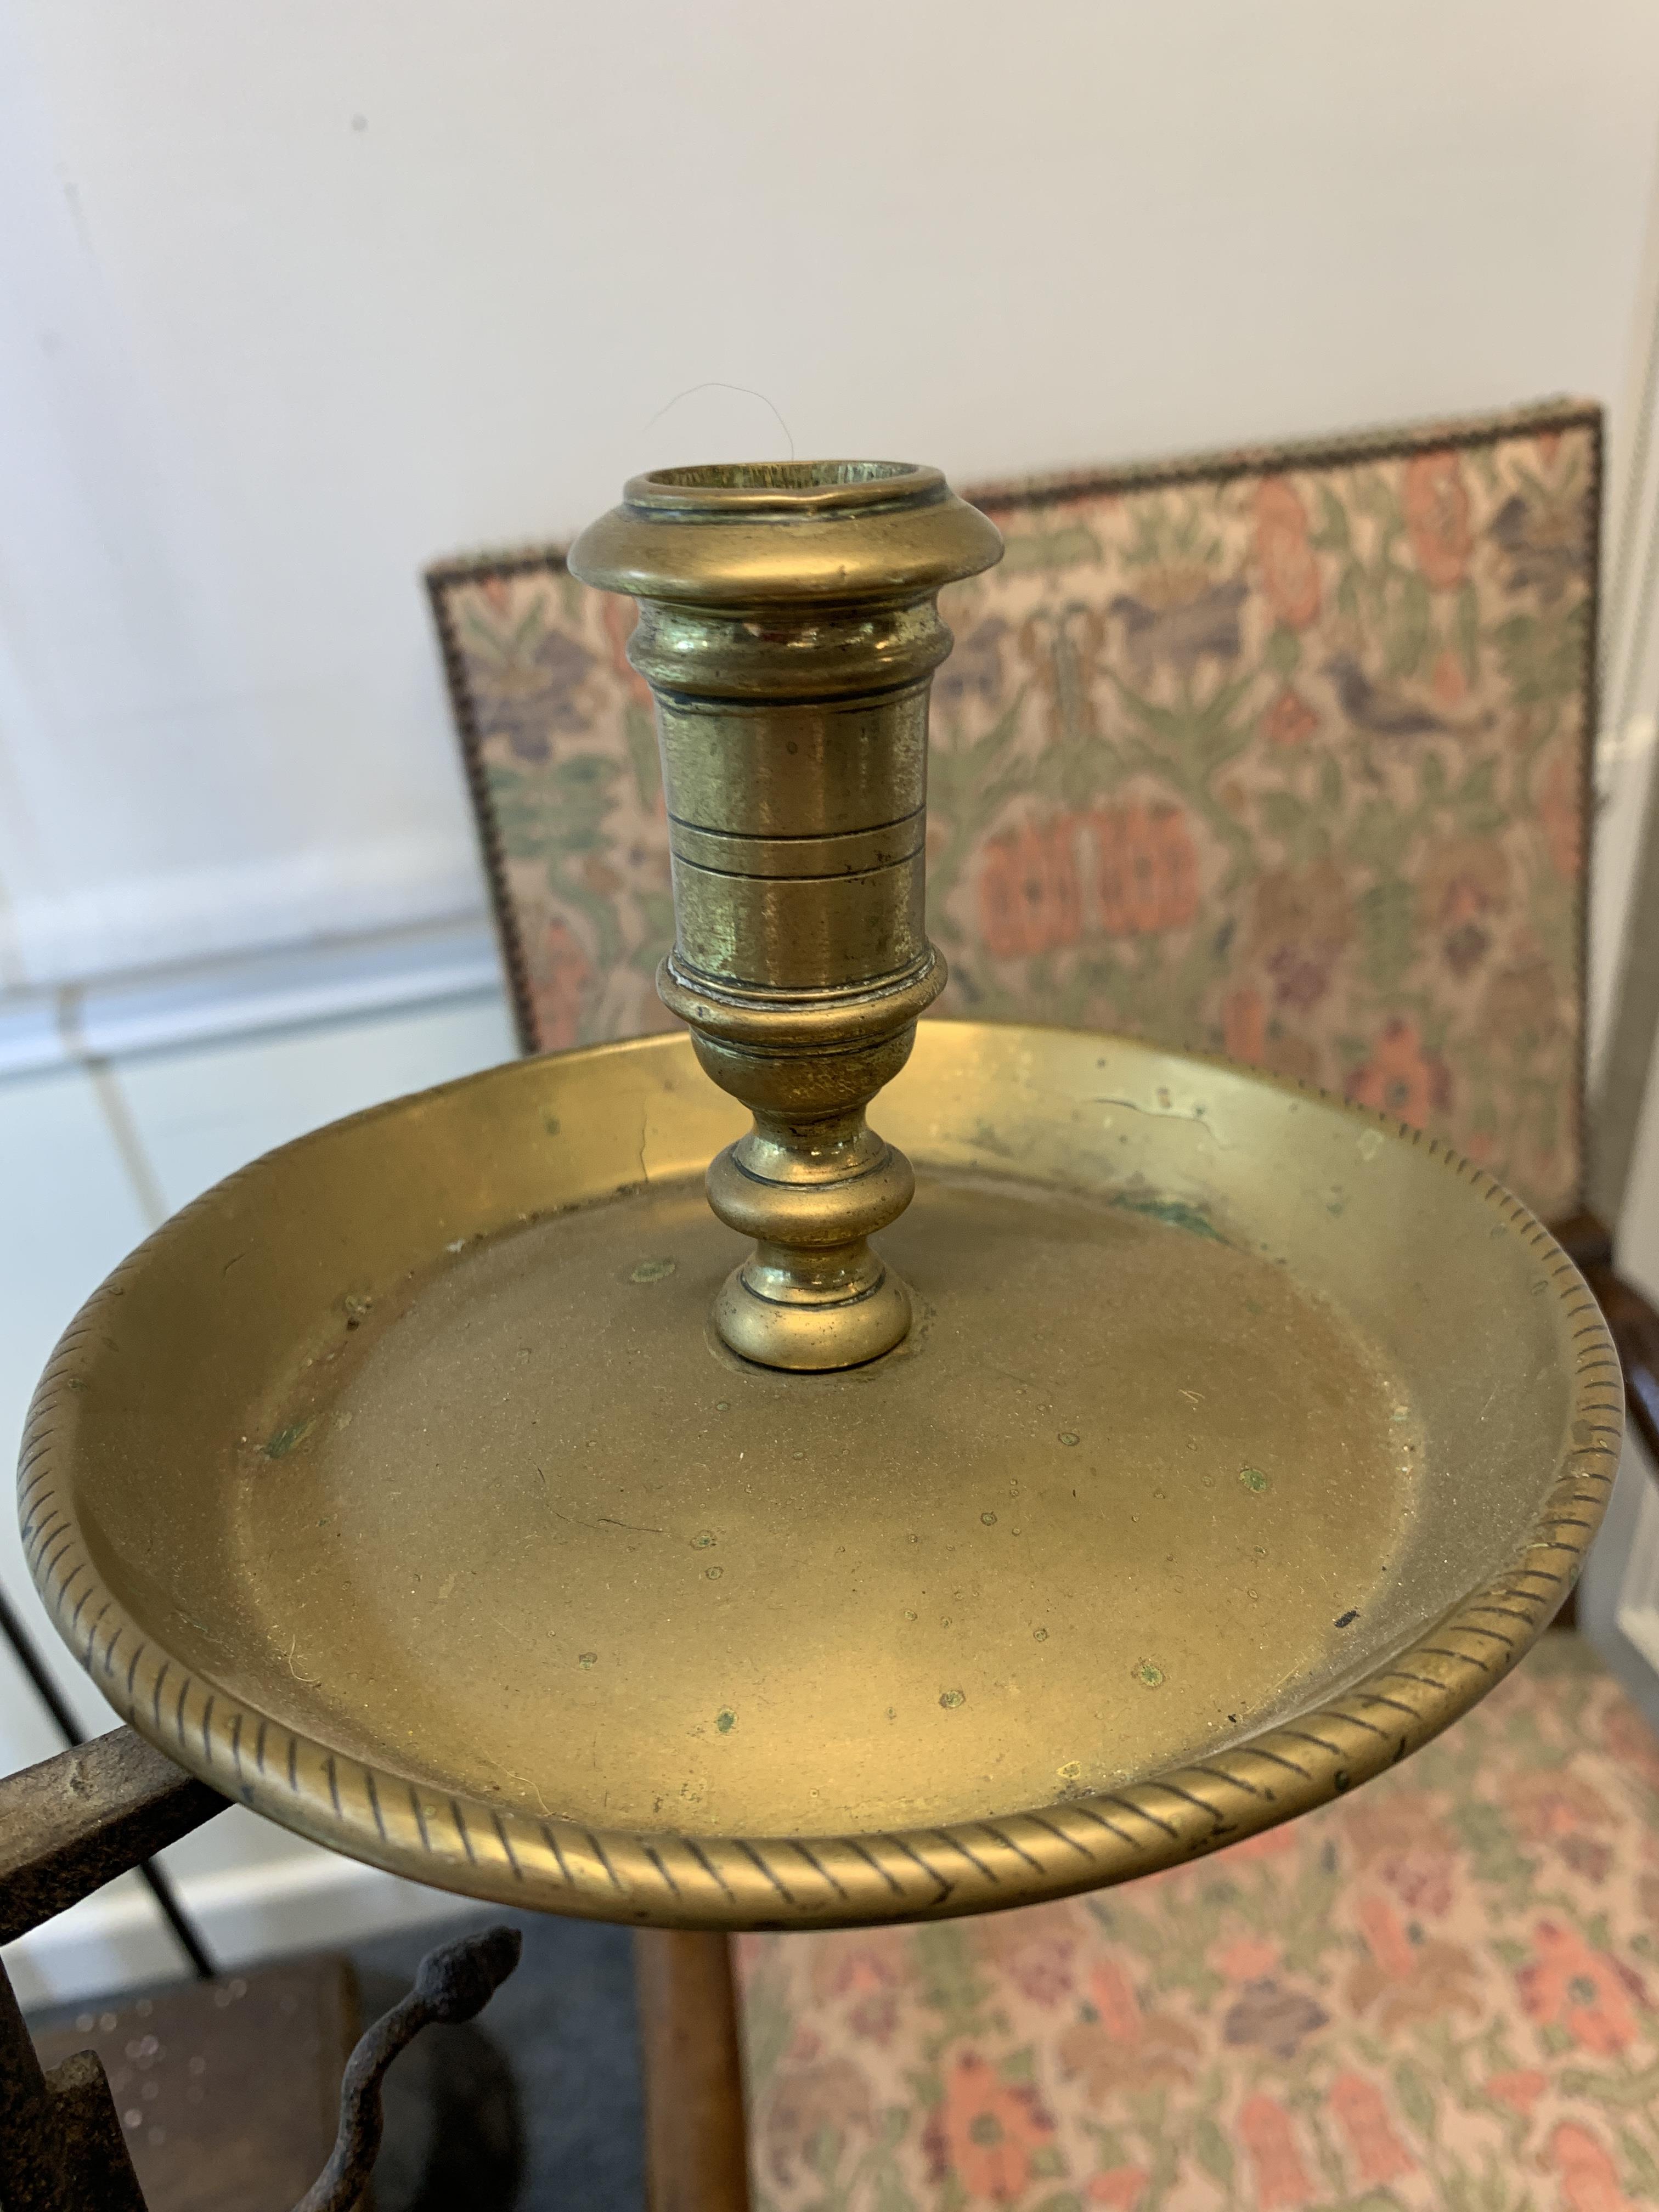 A WROUGHT IRON AND BRASS MOUNTED STANDING CANDLE HOLDER 18TH CENTURY with a turned acorn finial - Image 5 of 15